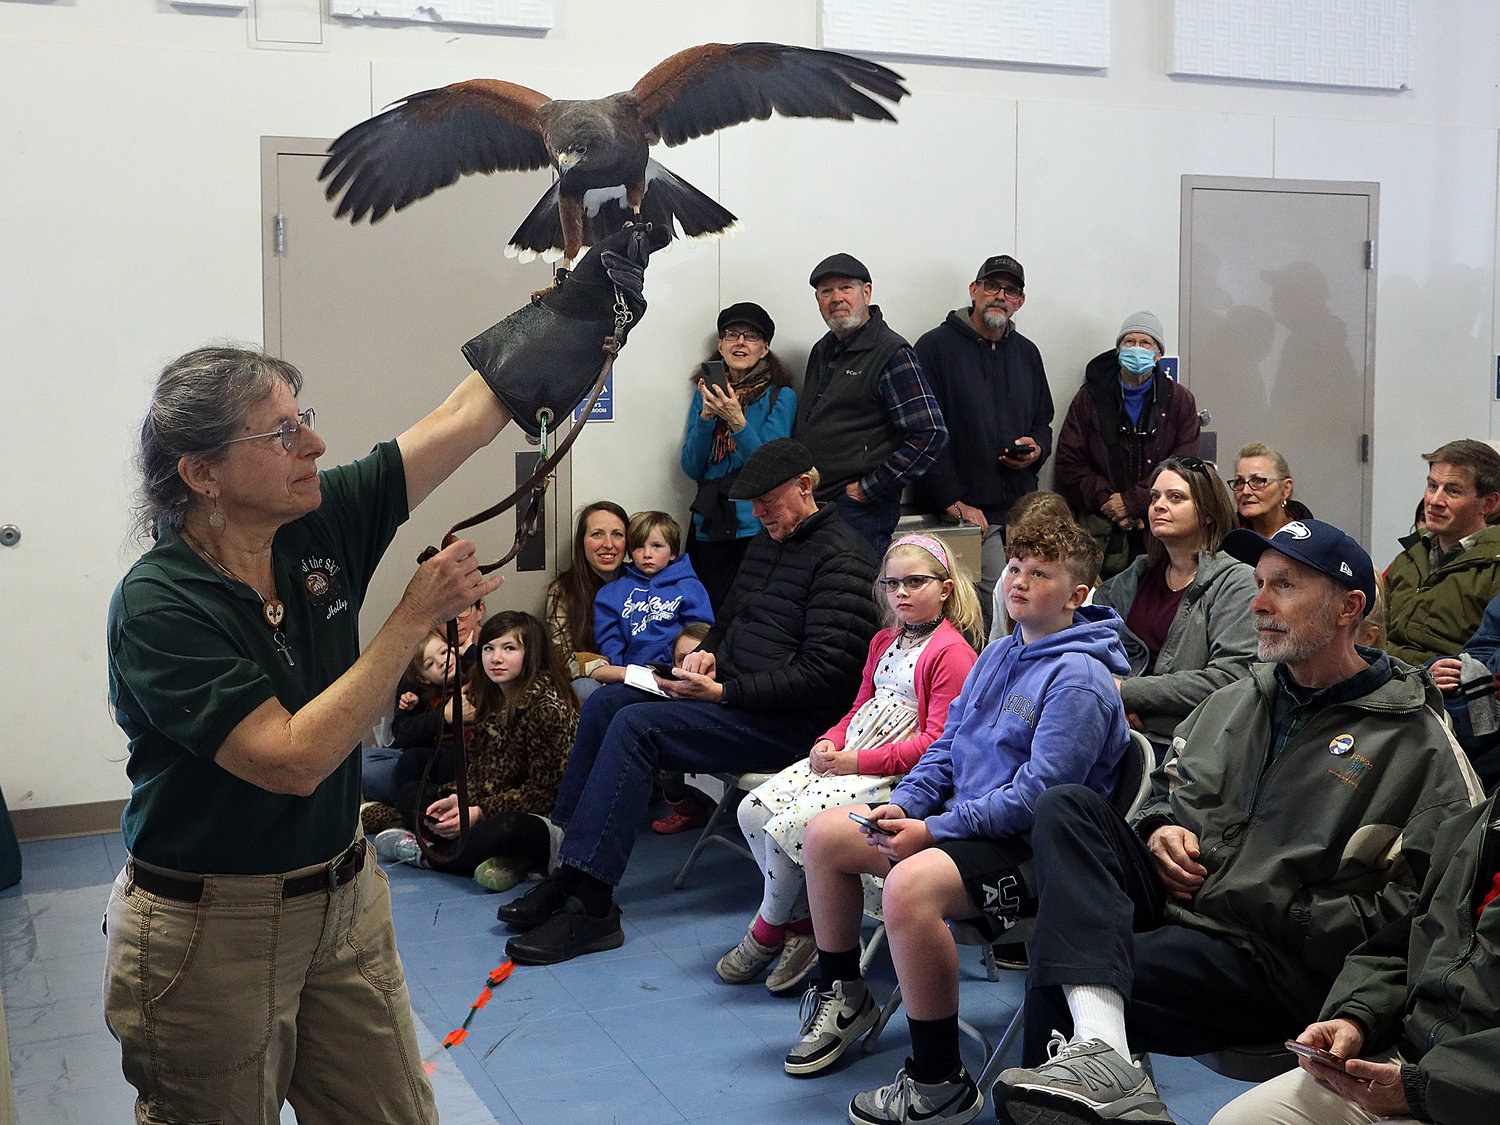 Sardis Raptor Center drew a crowd for its “Hunters of the Sky” live raptor presentation during the all-day birding expo on March 18.